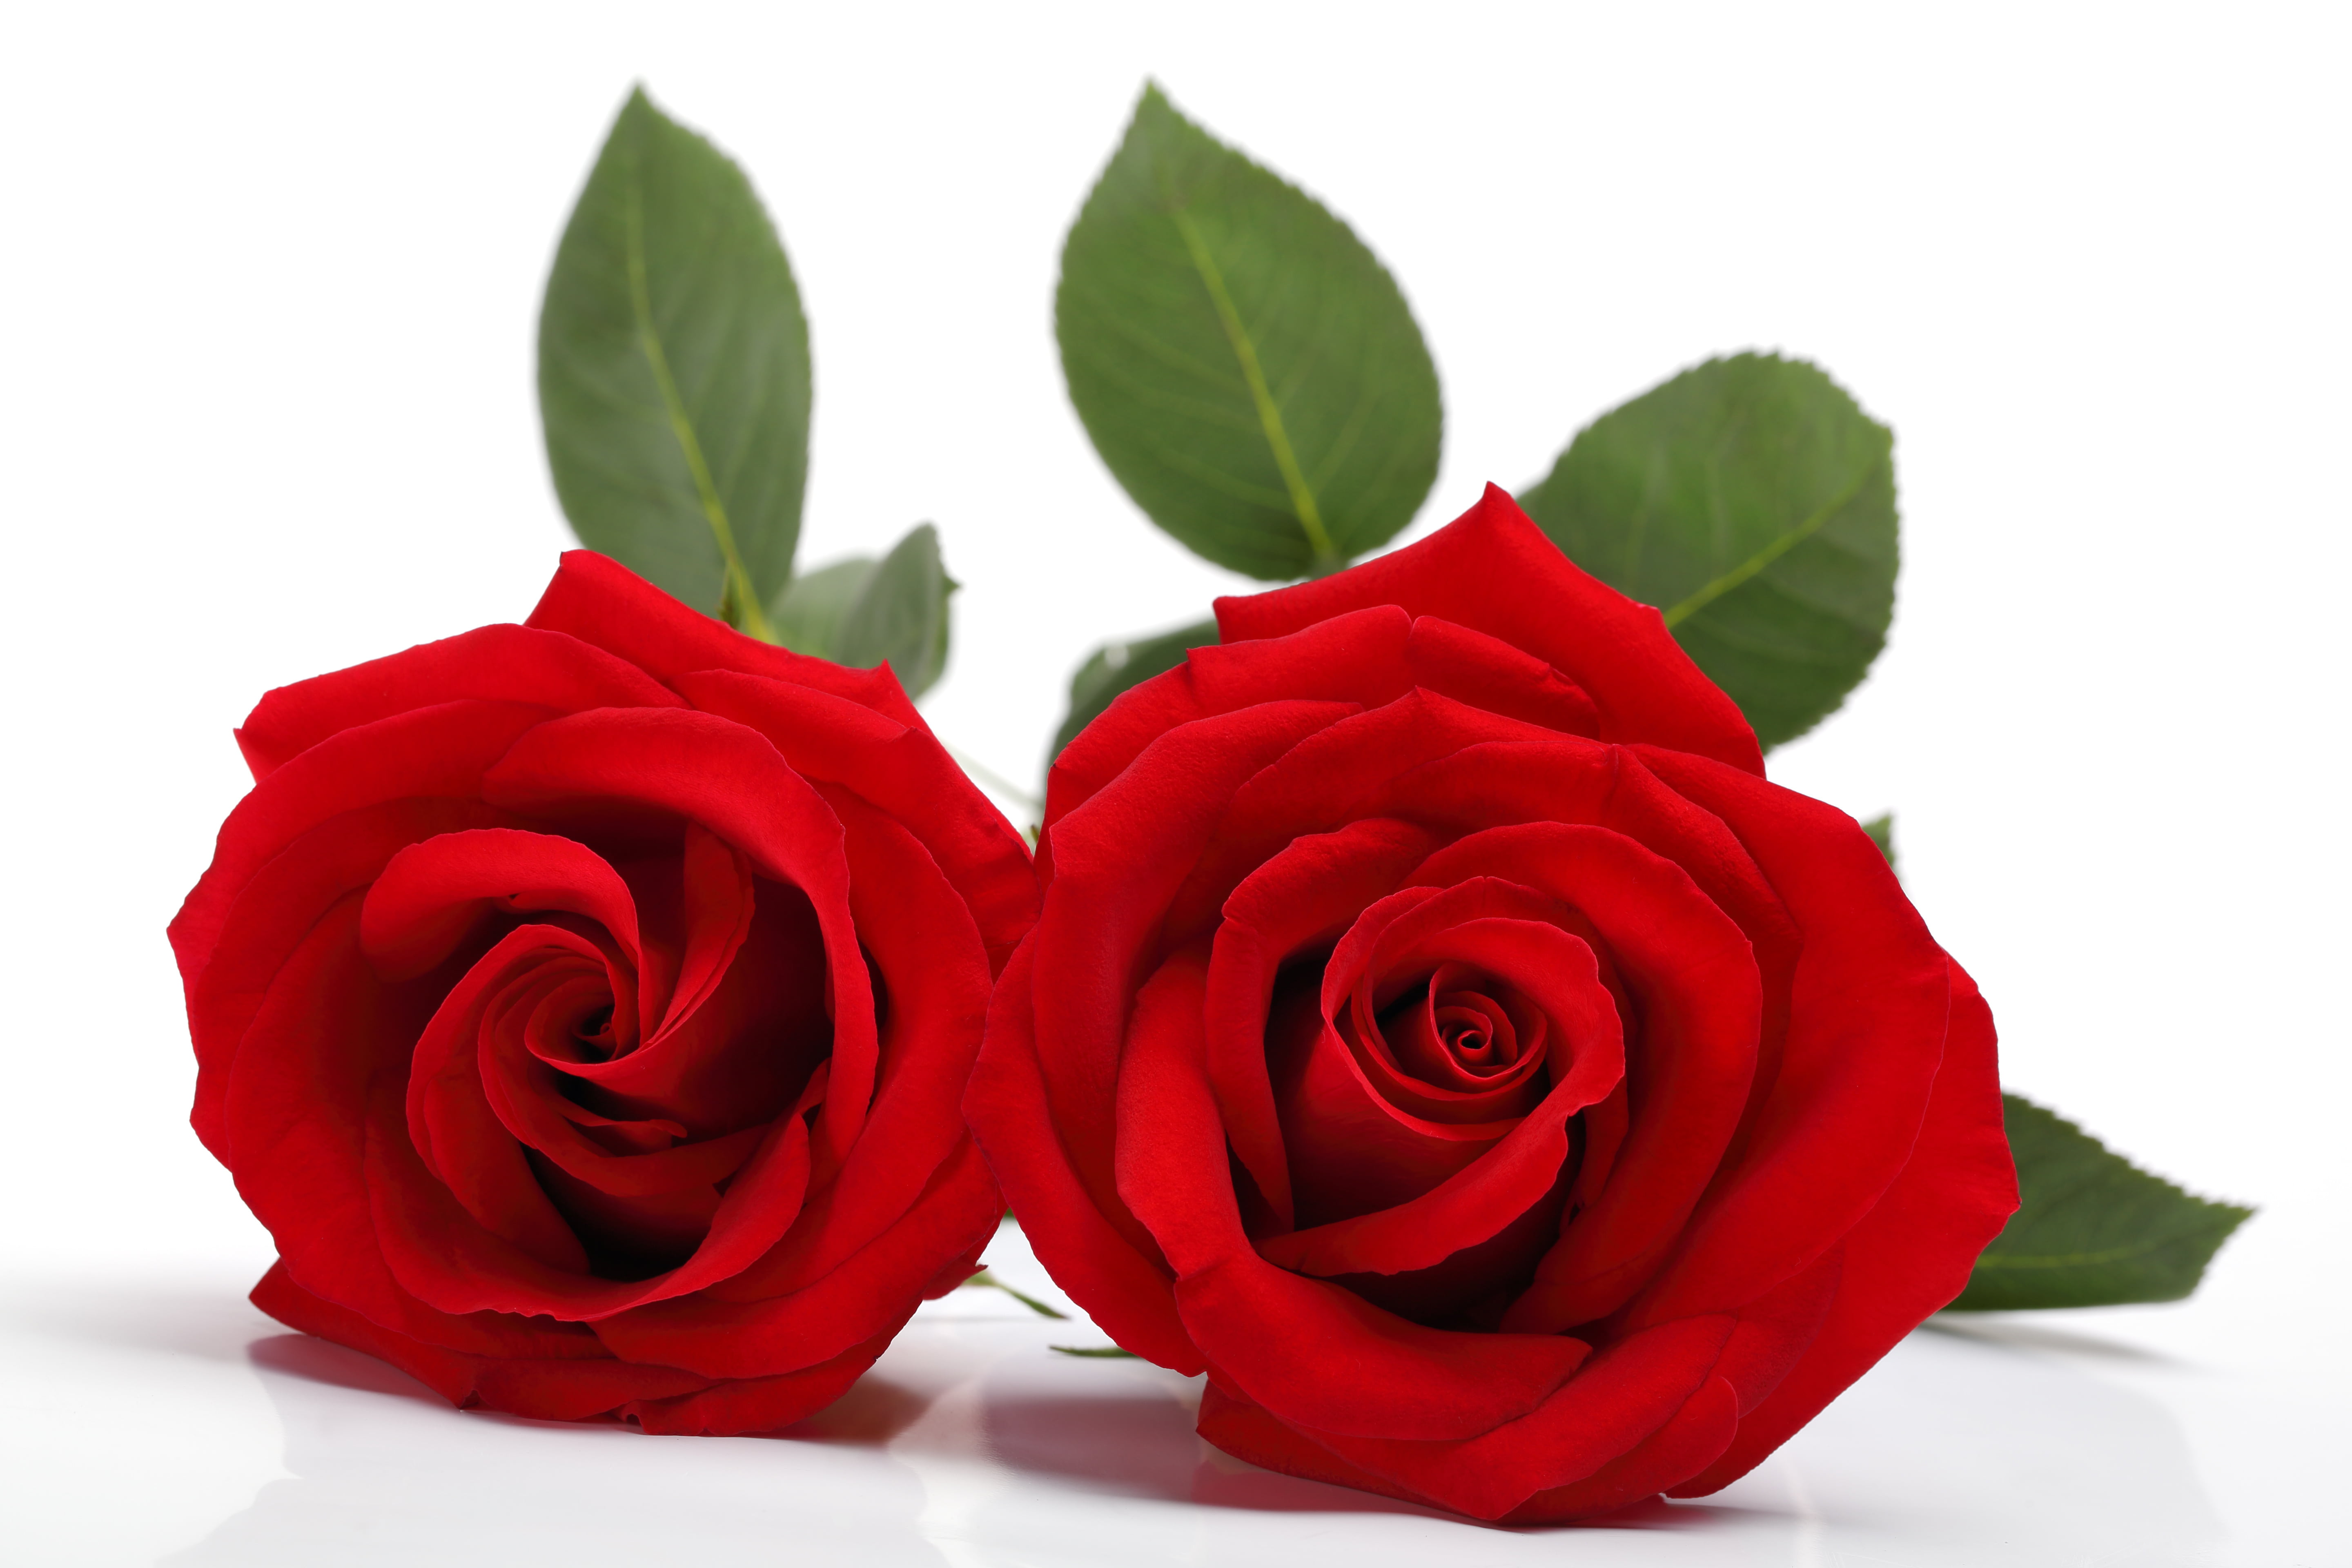 Red Roses On White Surface Hd Wallpaper